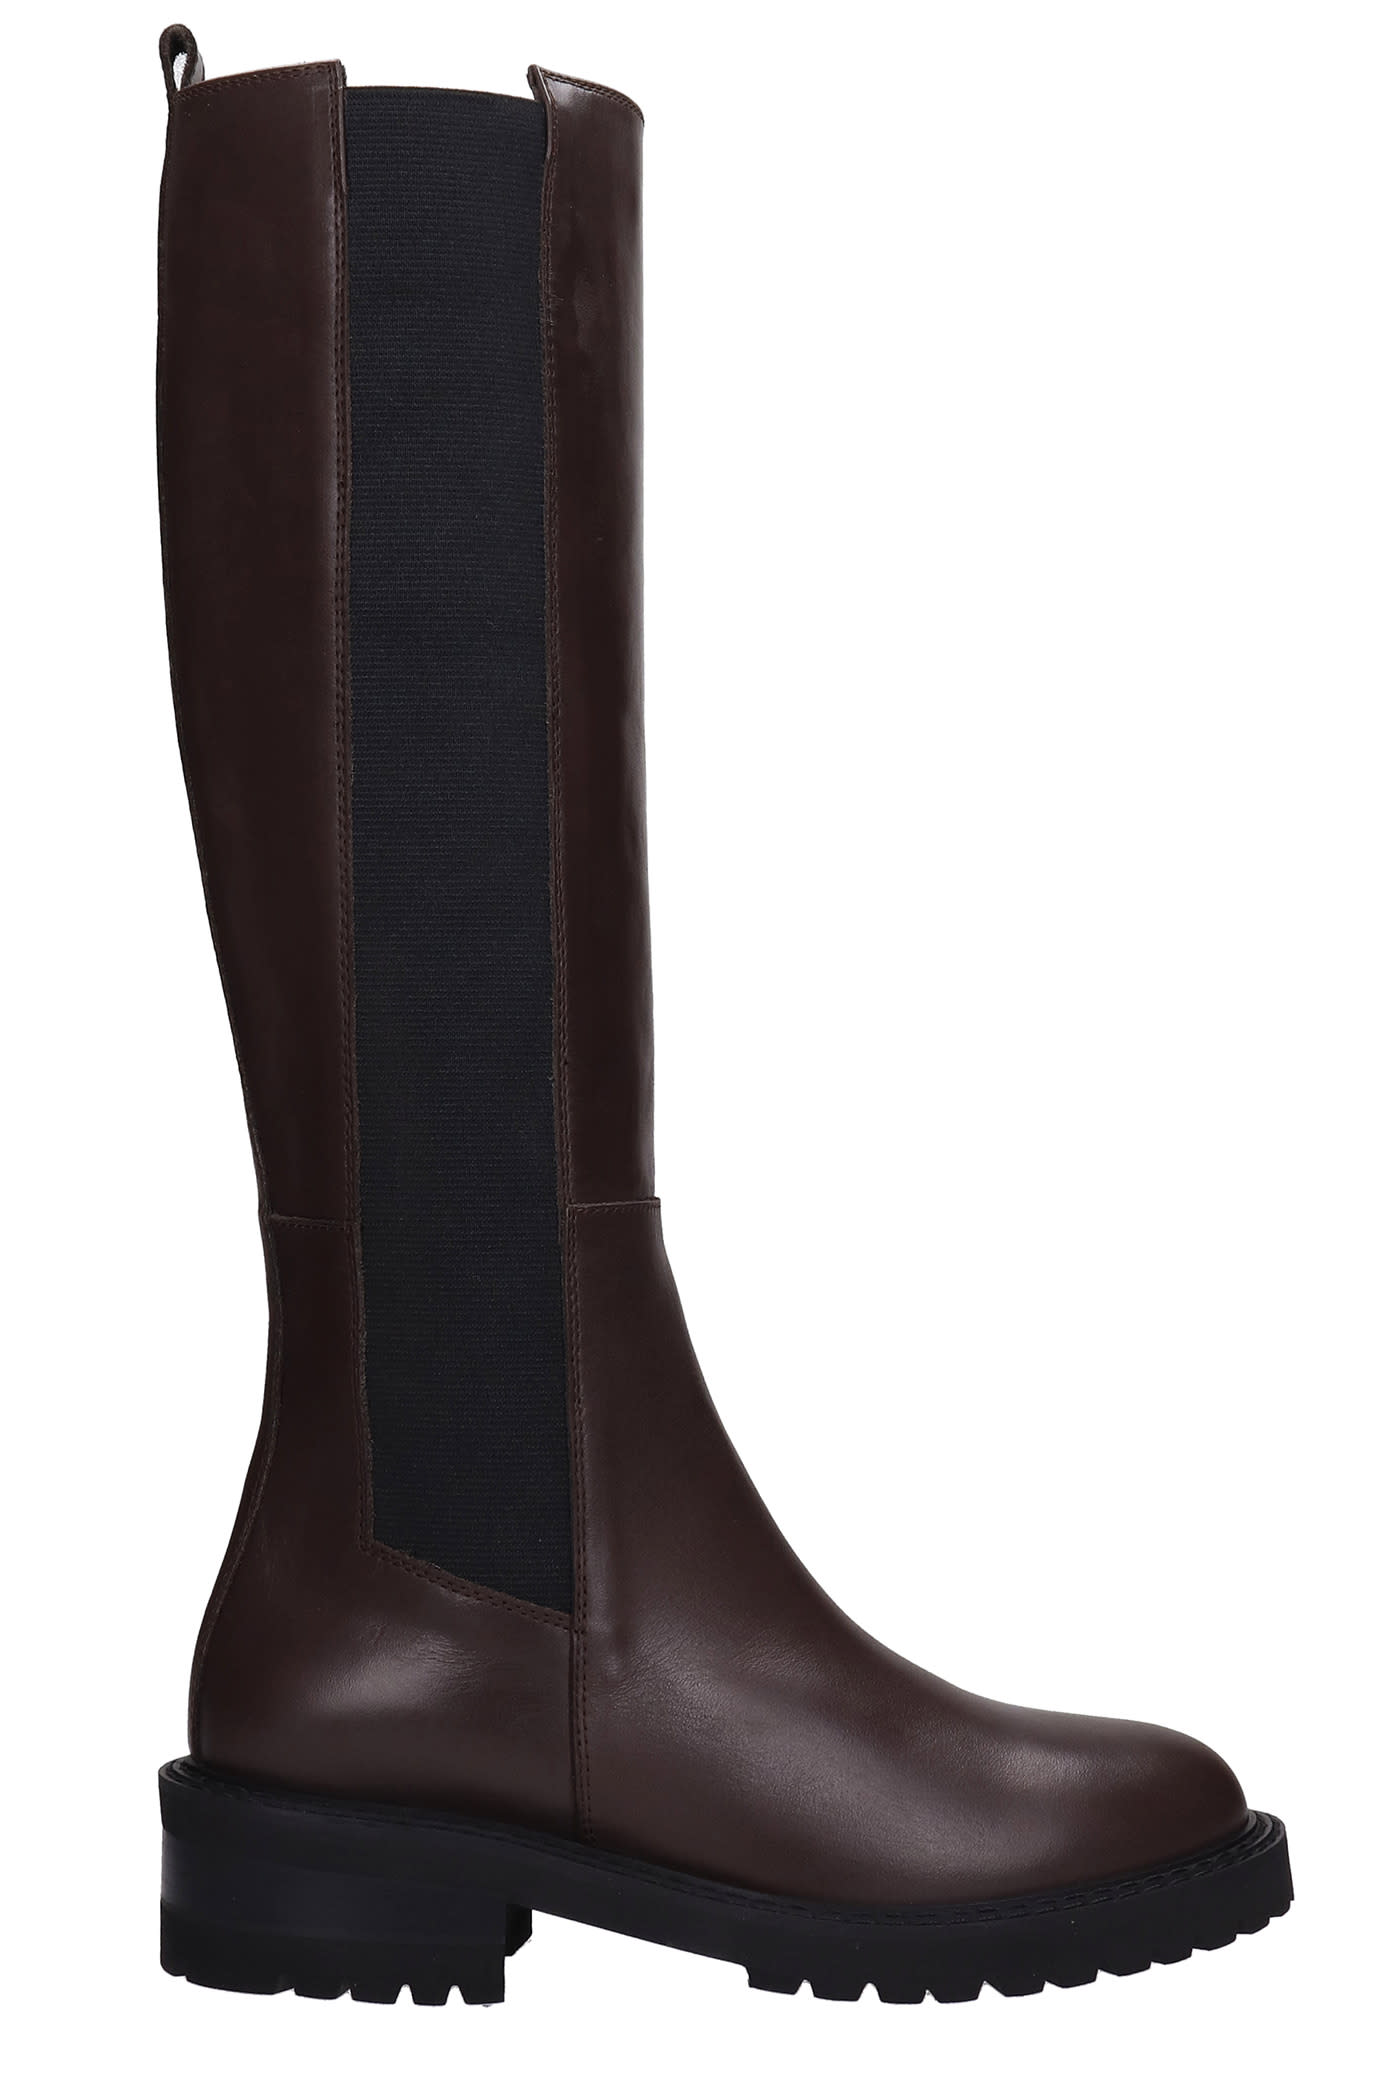 Via Roma 15 Low Heels Boots In Dark Brown Leather